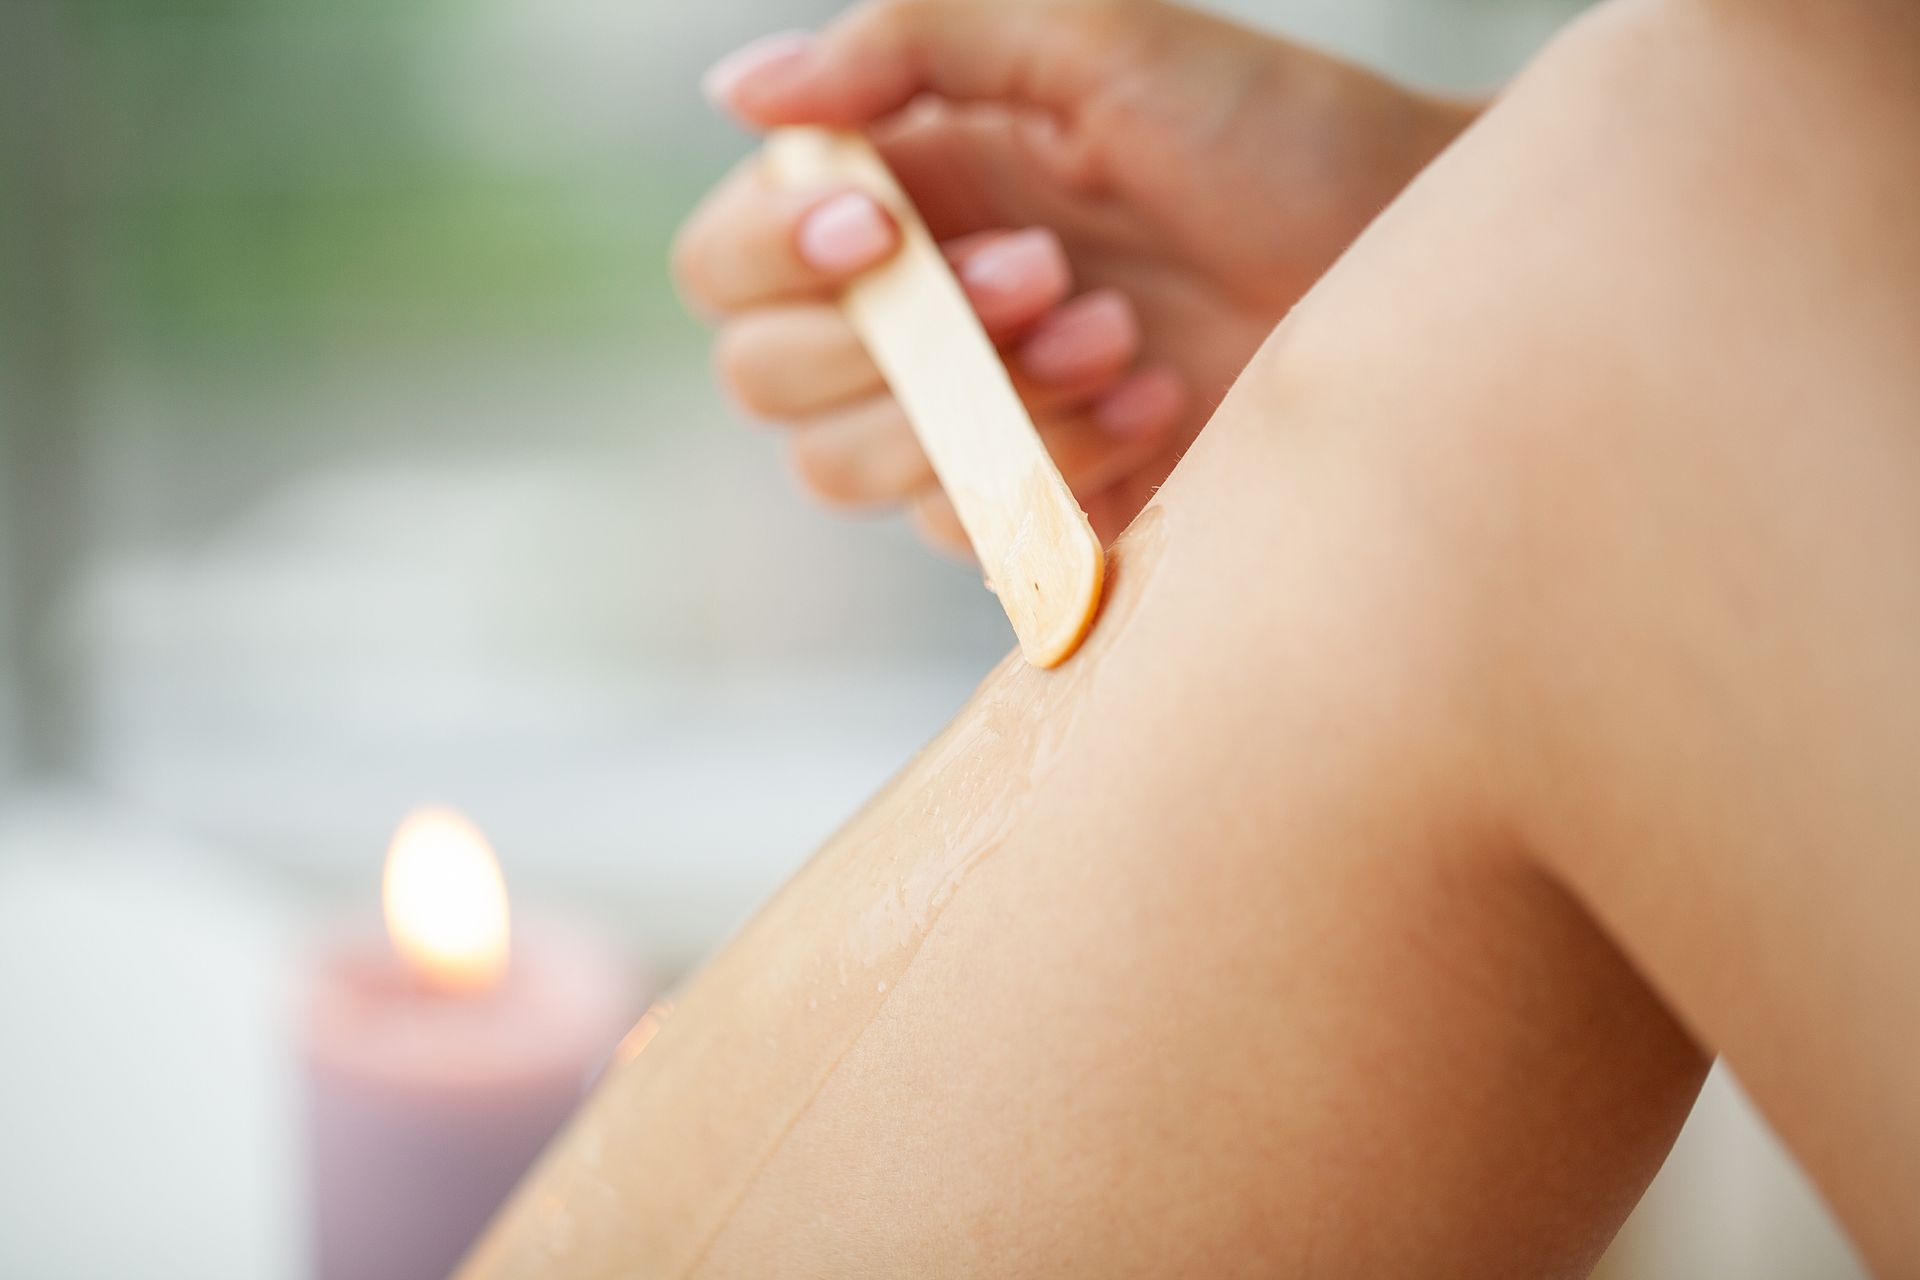 A woman is waxing her legs with a wax stick.